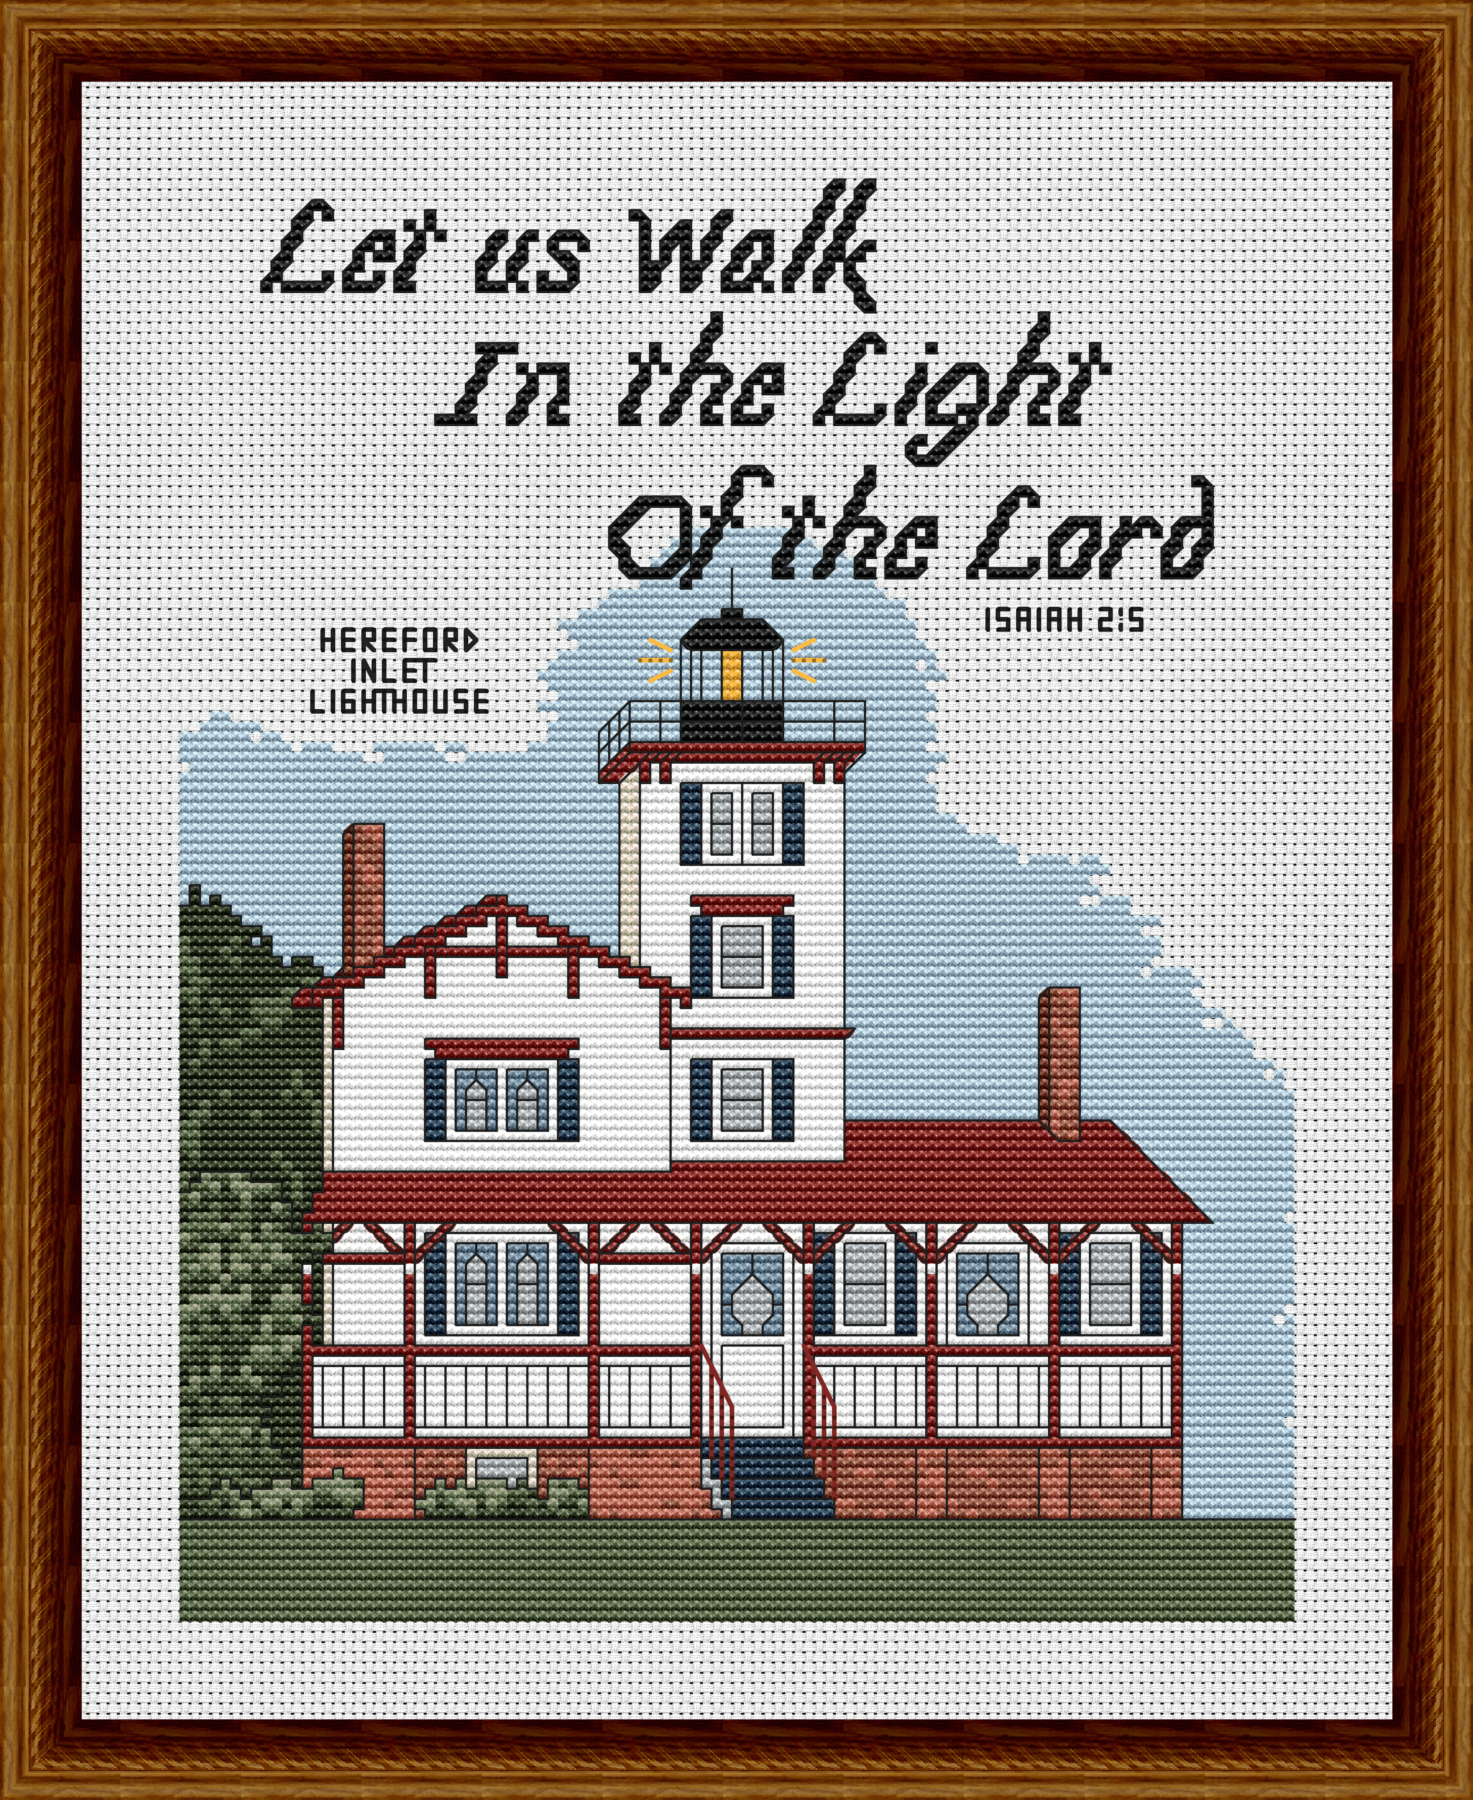 Hereford Inlet Lighthouse Bible Verse Cross Stitch Pattern 830